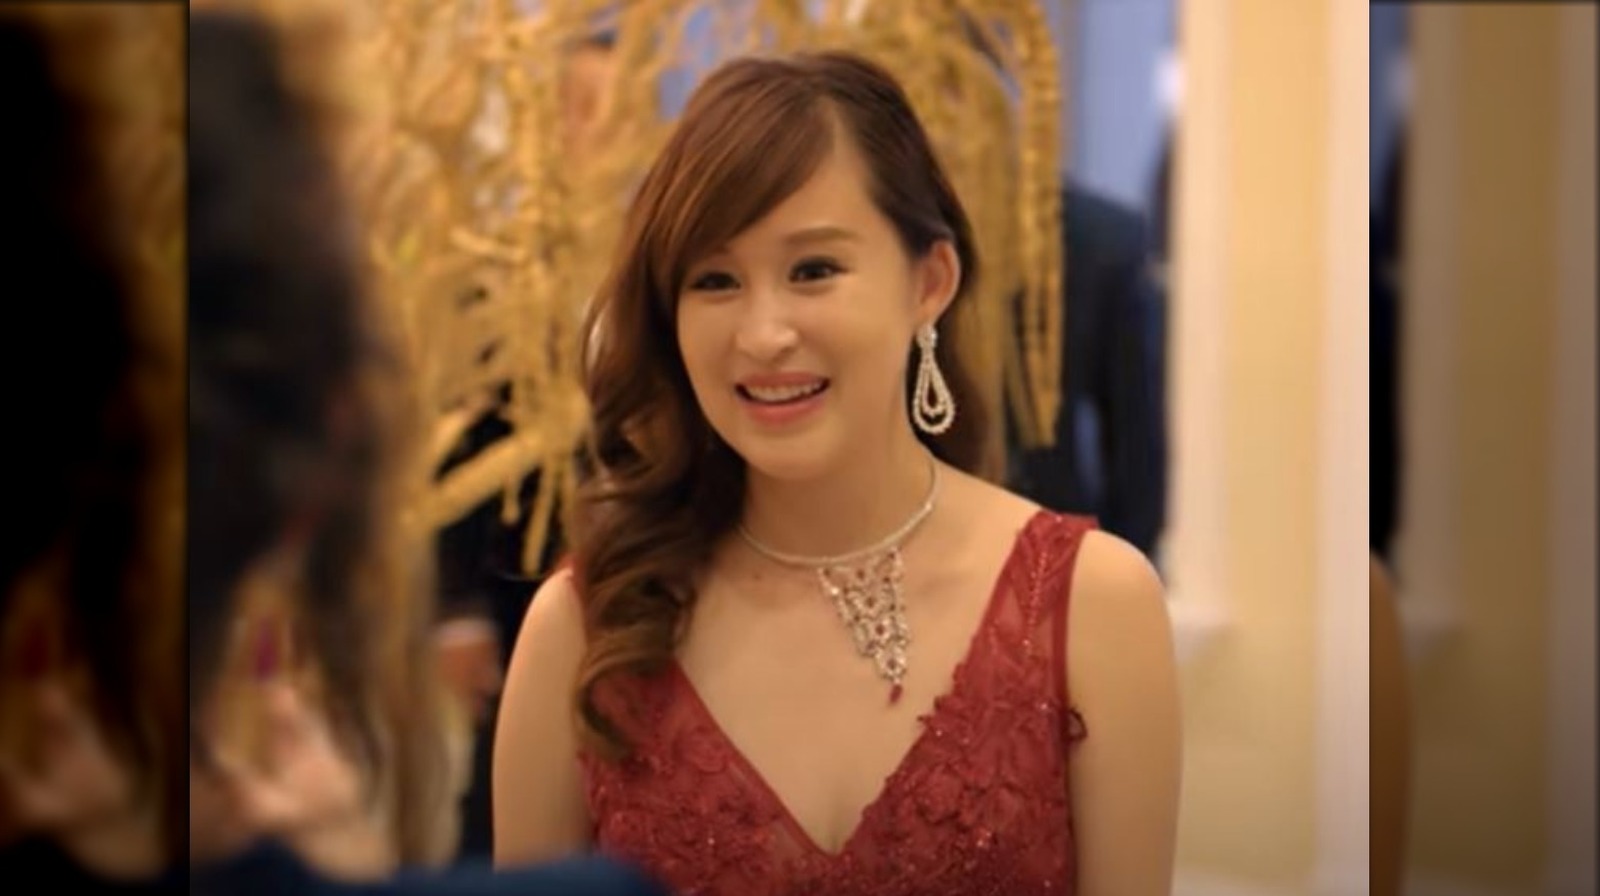 who is cherie chan from bling empire and what is her net worth